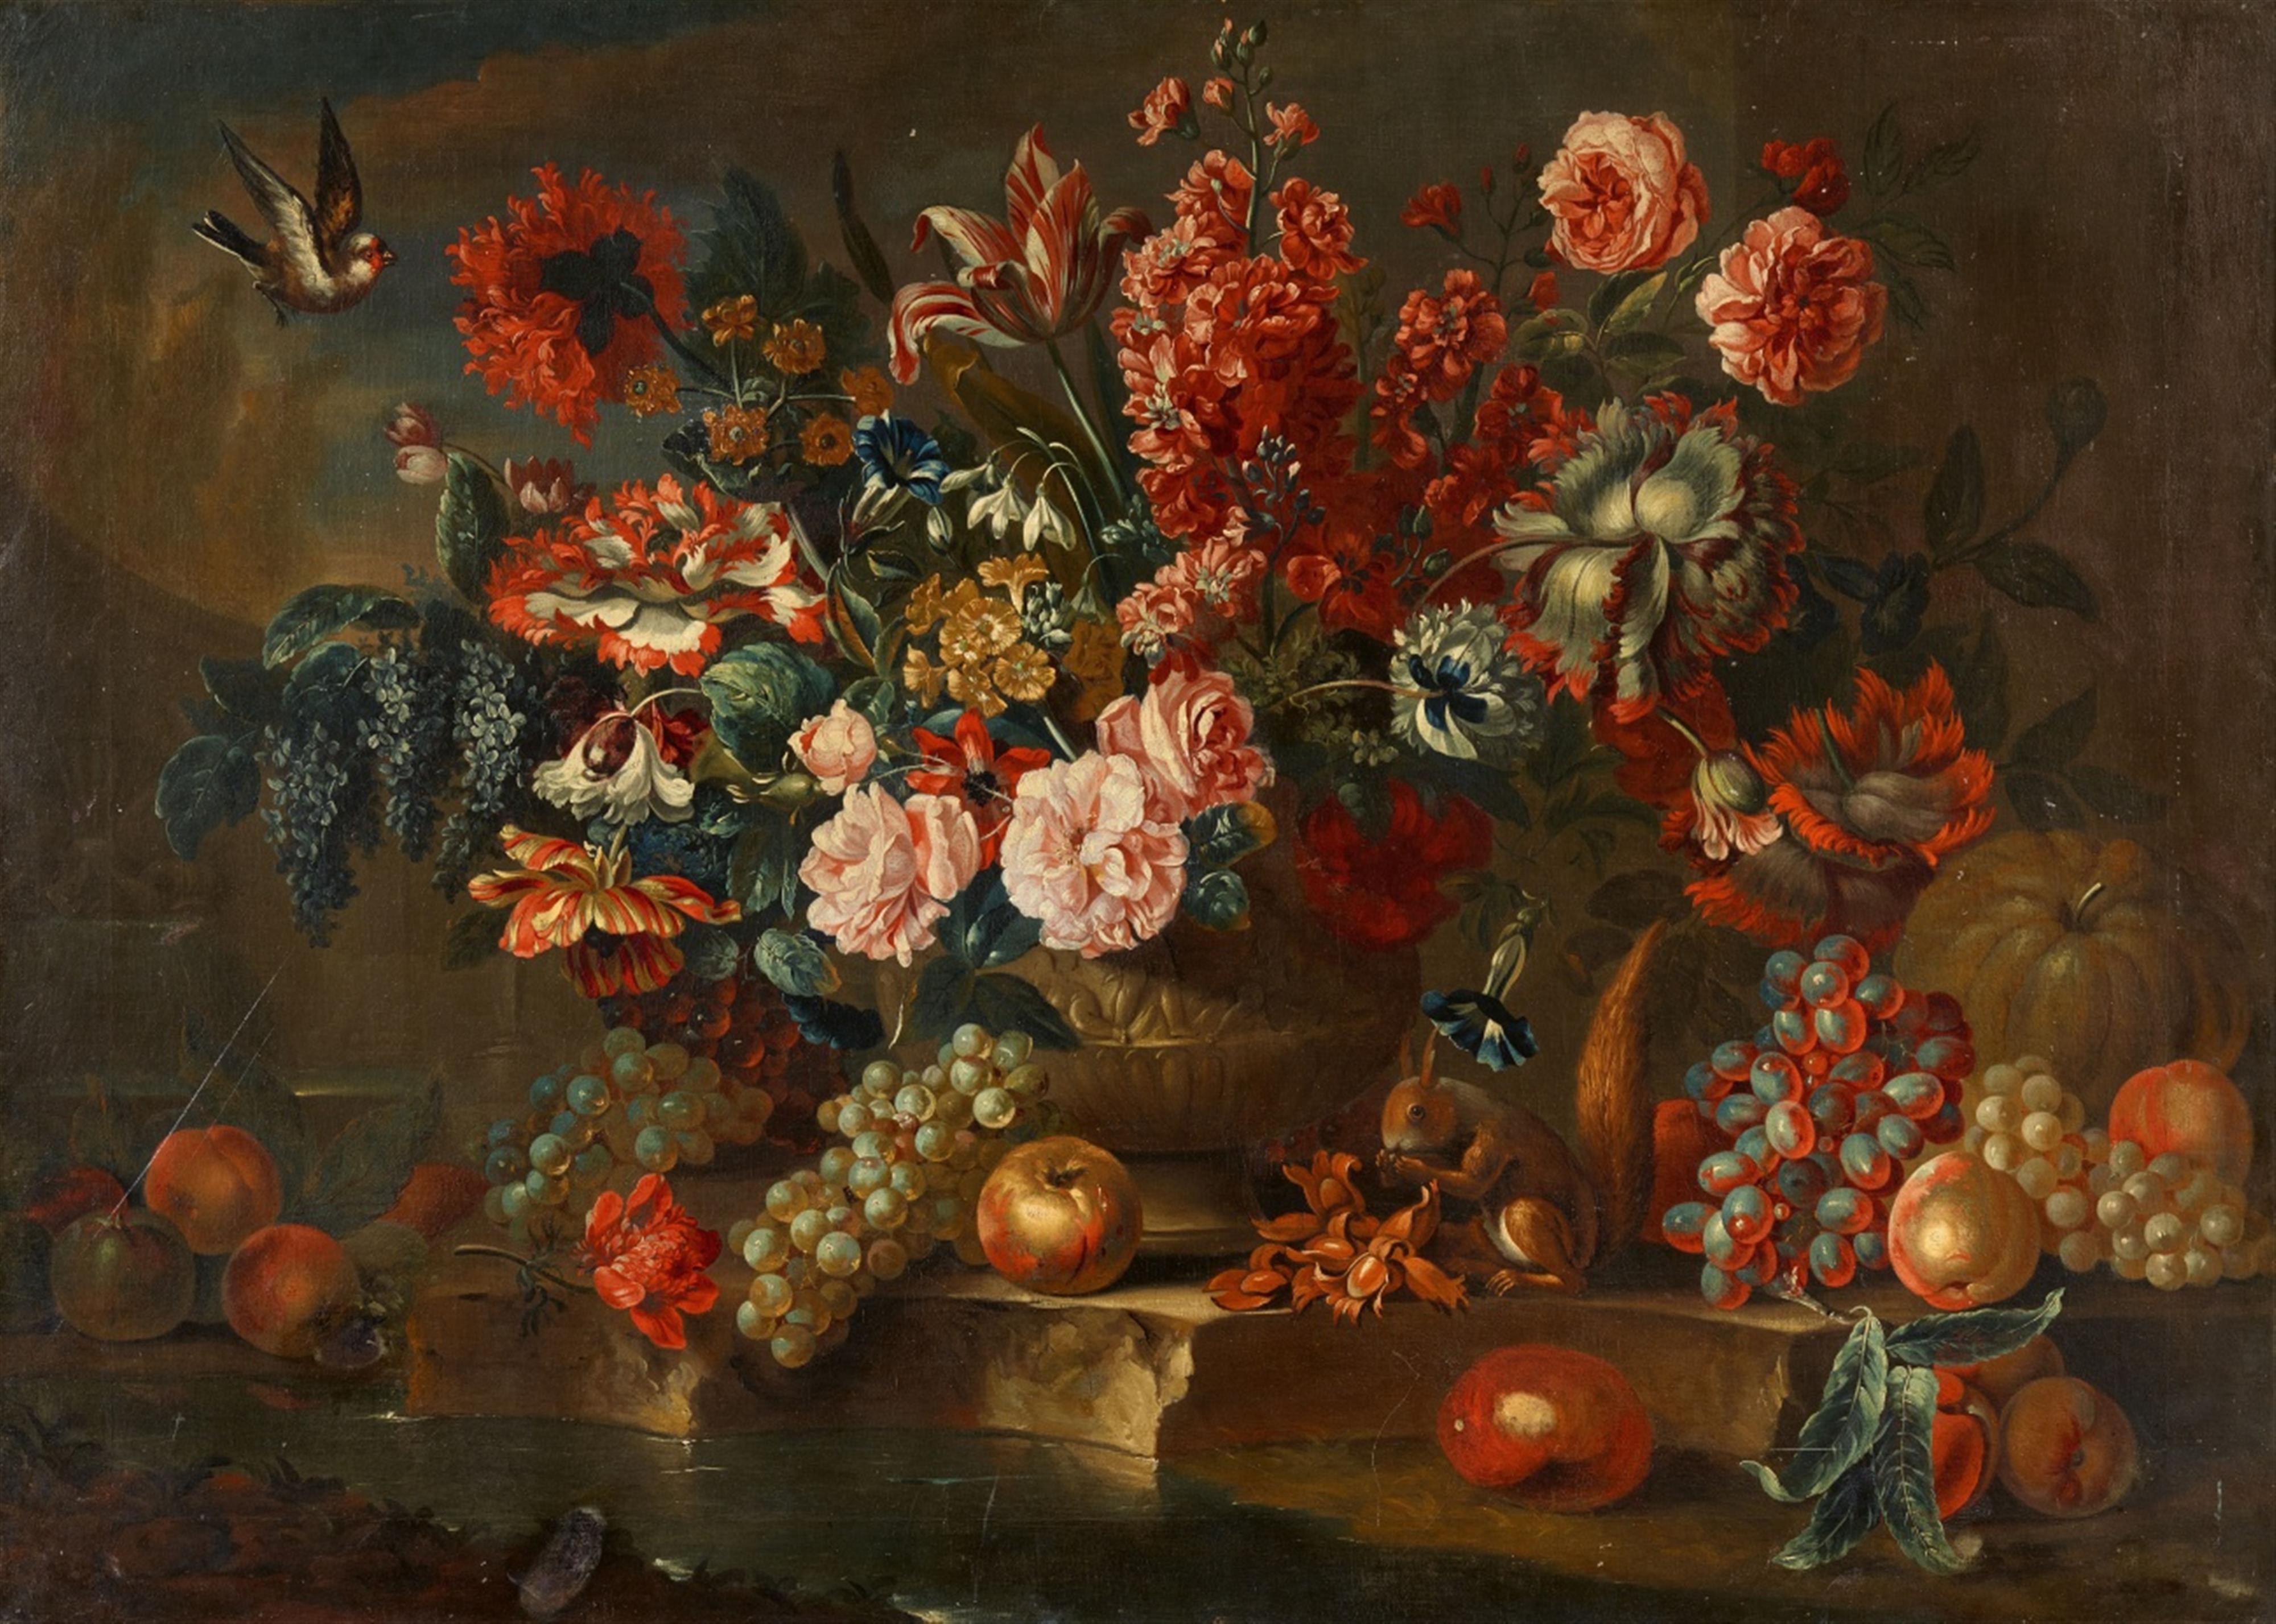 Pieter III Casteels - Roses, Poppies, and Sweet Peas in Vase on a Plinth with Grapes, Peaches, a Pumpkin, a Goldfinch, and a Squirrel  - image-1